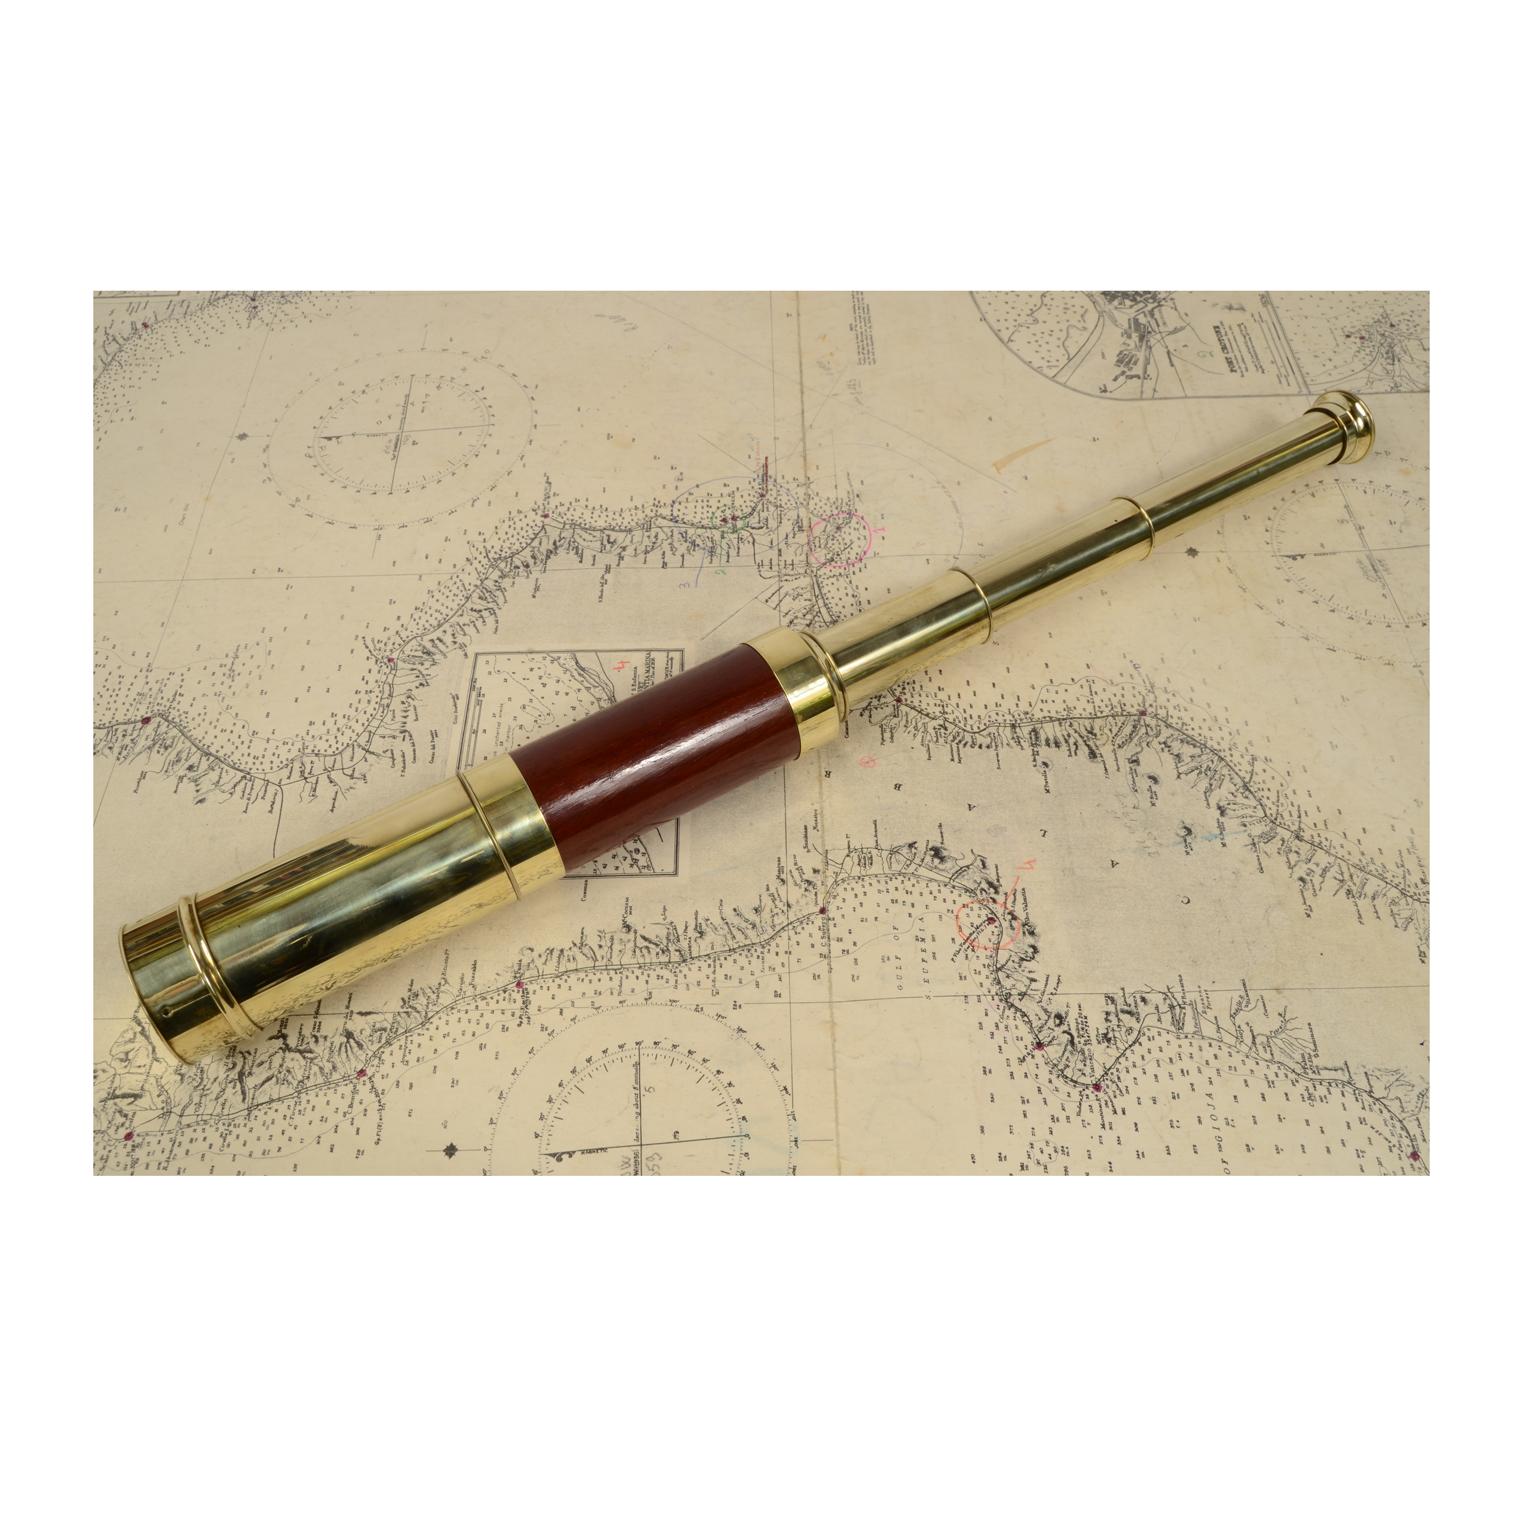 Brass telescope with mahogany-coated handle, focusing with three extensions, complete with sunshade extension, cap and dust flap. Maximum length 83.5 cm, minimum 27 cm, focal diameter 4.5 cm. English manufacture of the early 19th century. Excellent